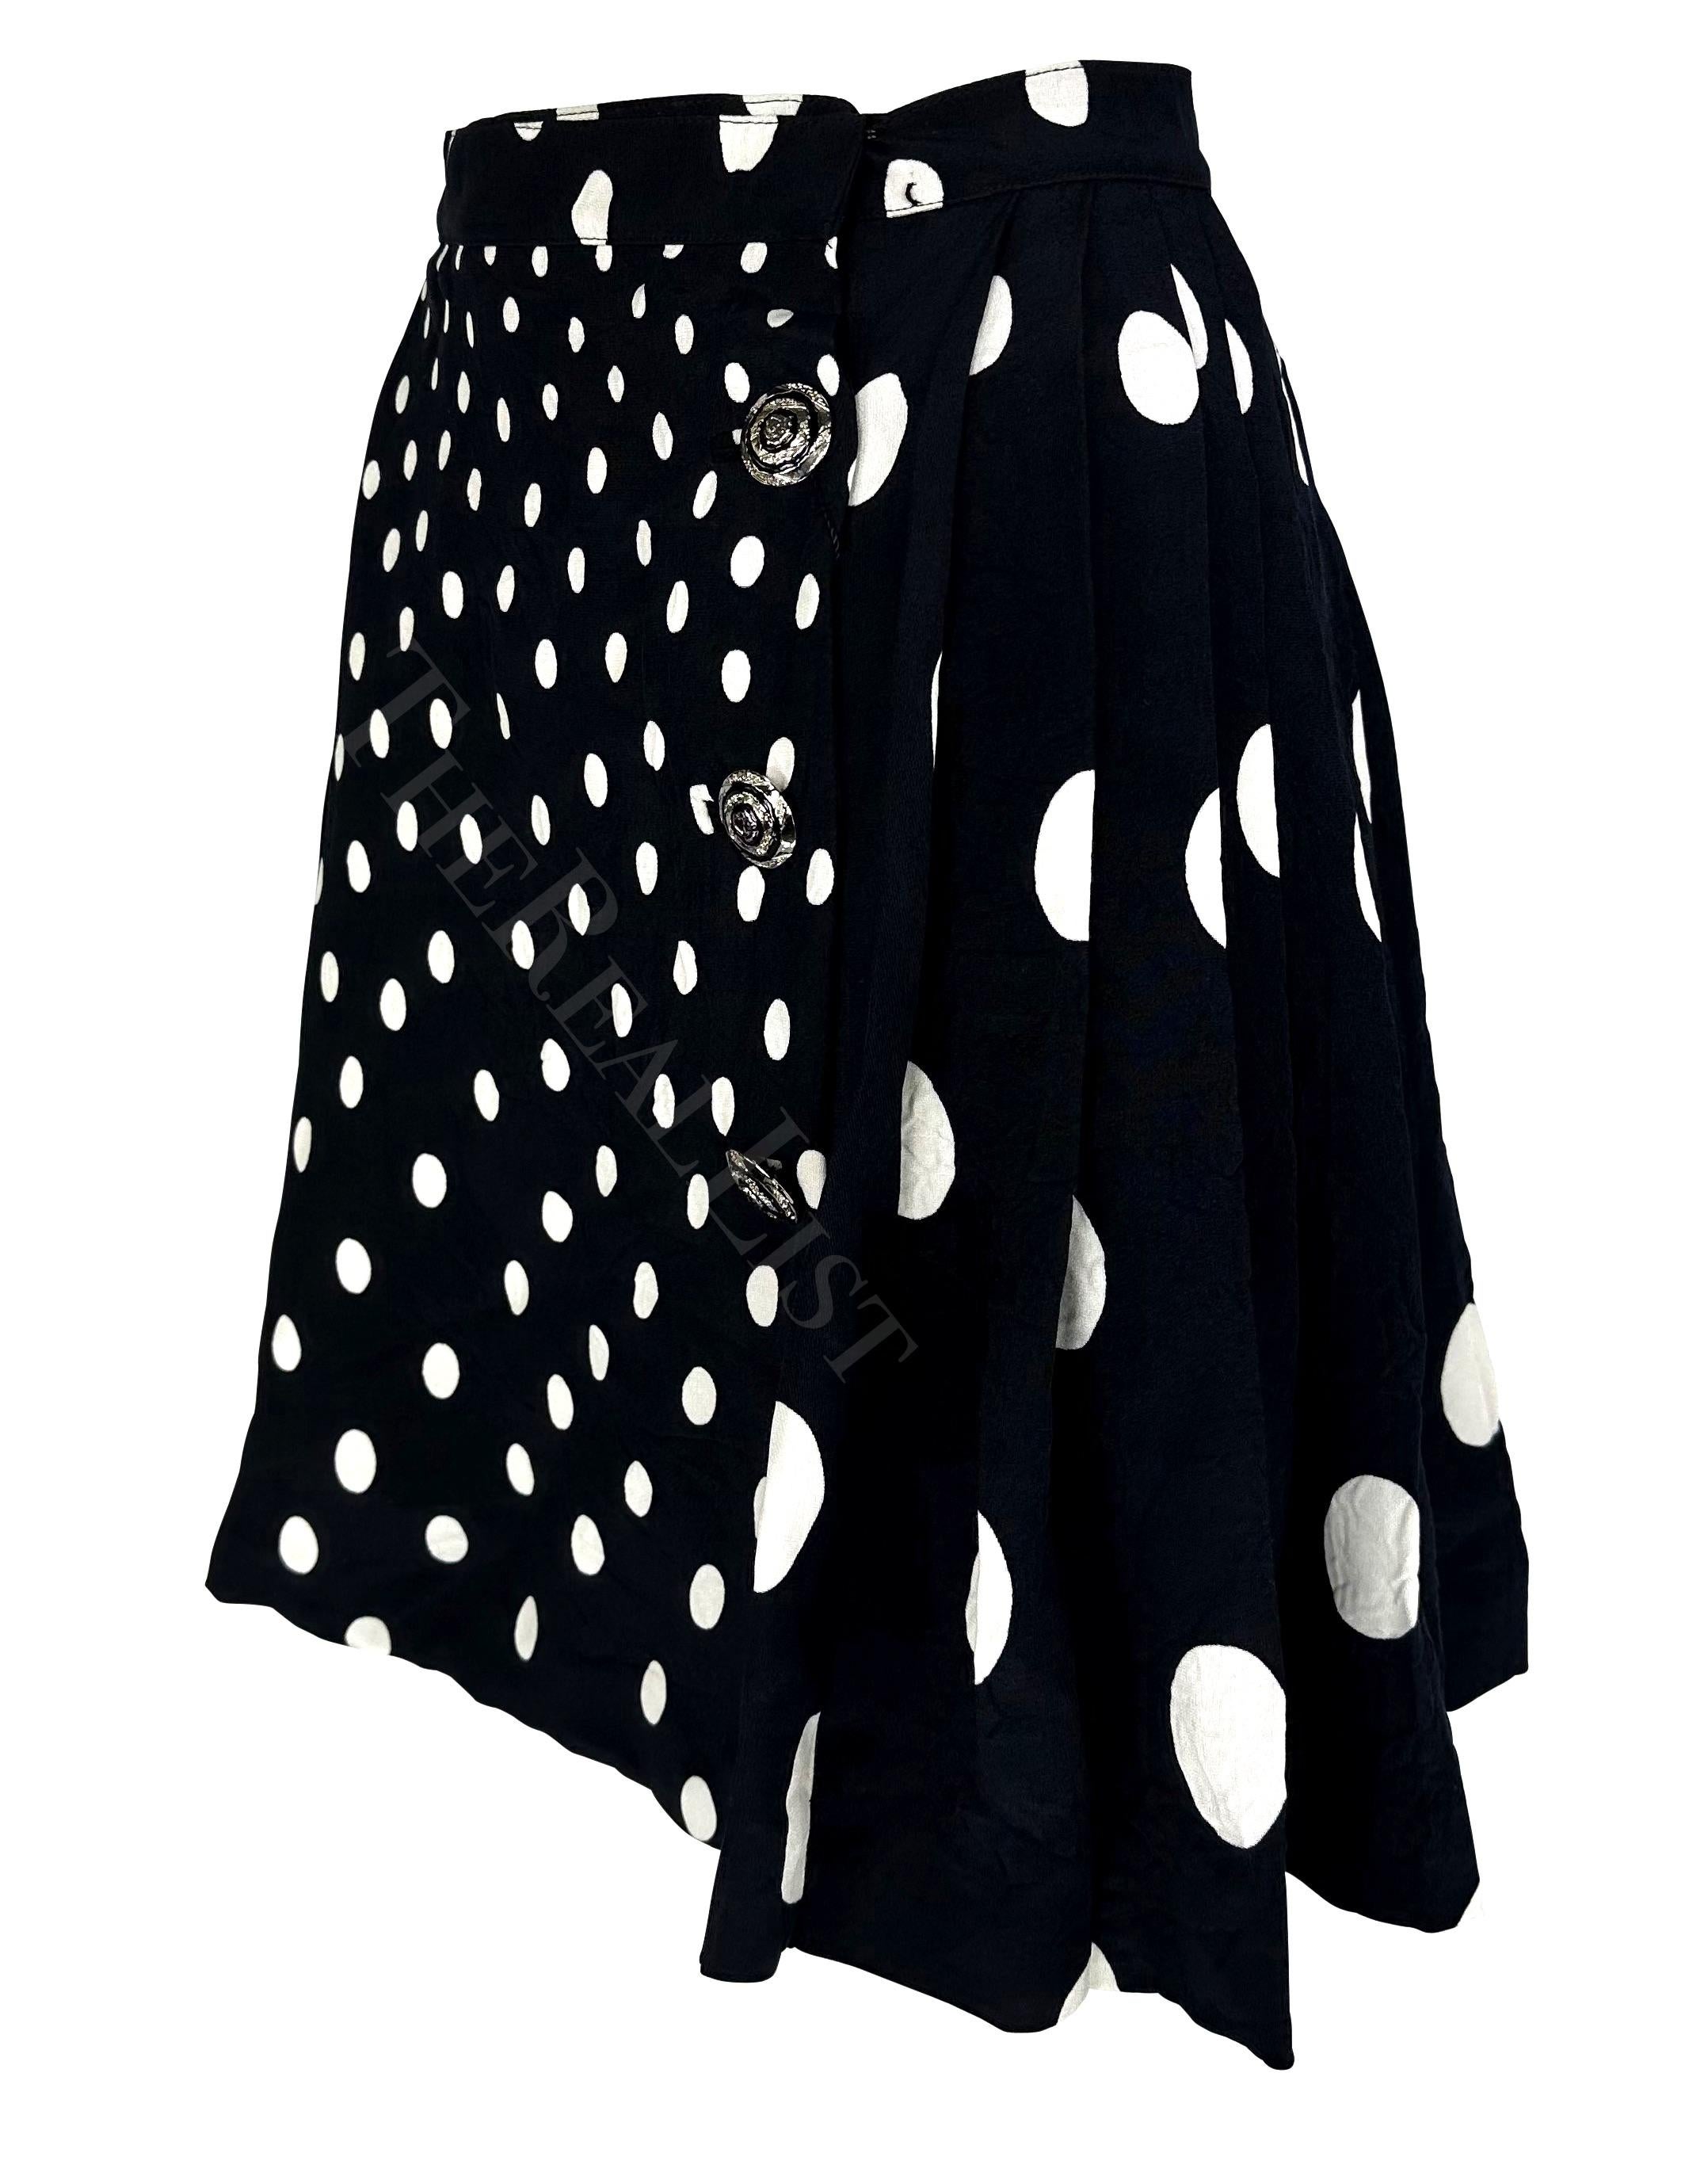 Presenting a fabulous pleated black and white polka dot Gianni Versace skirt, designed by Gianni Versace. From the Spring/Summer 1994 collection, this intentionally wrinkled skirt is covered in small and large polka dots and is made complete with